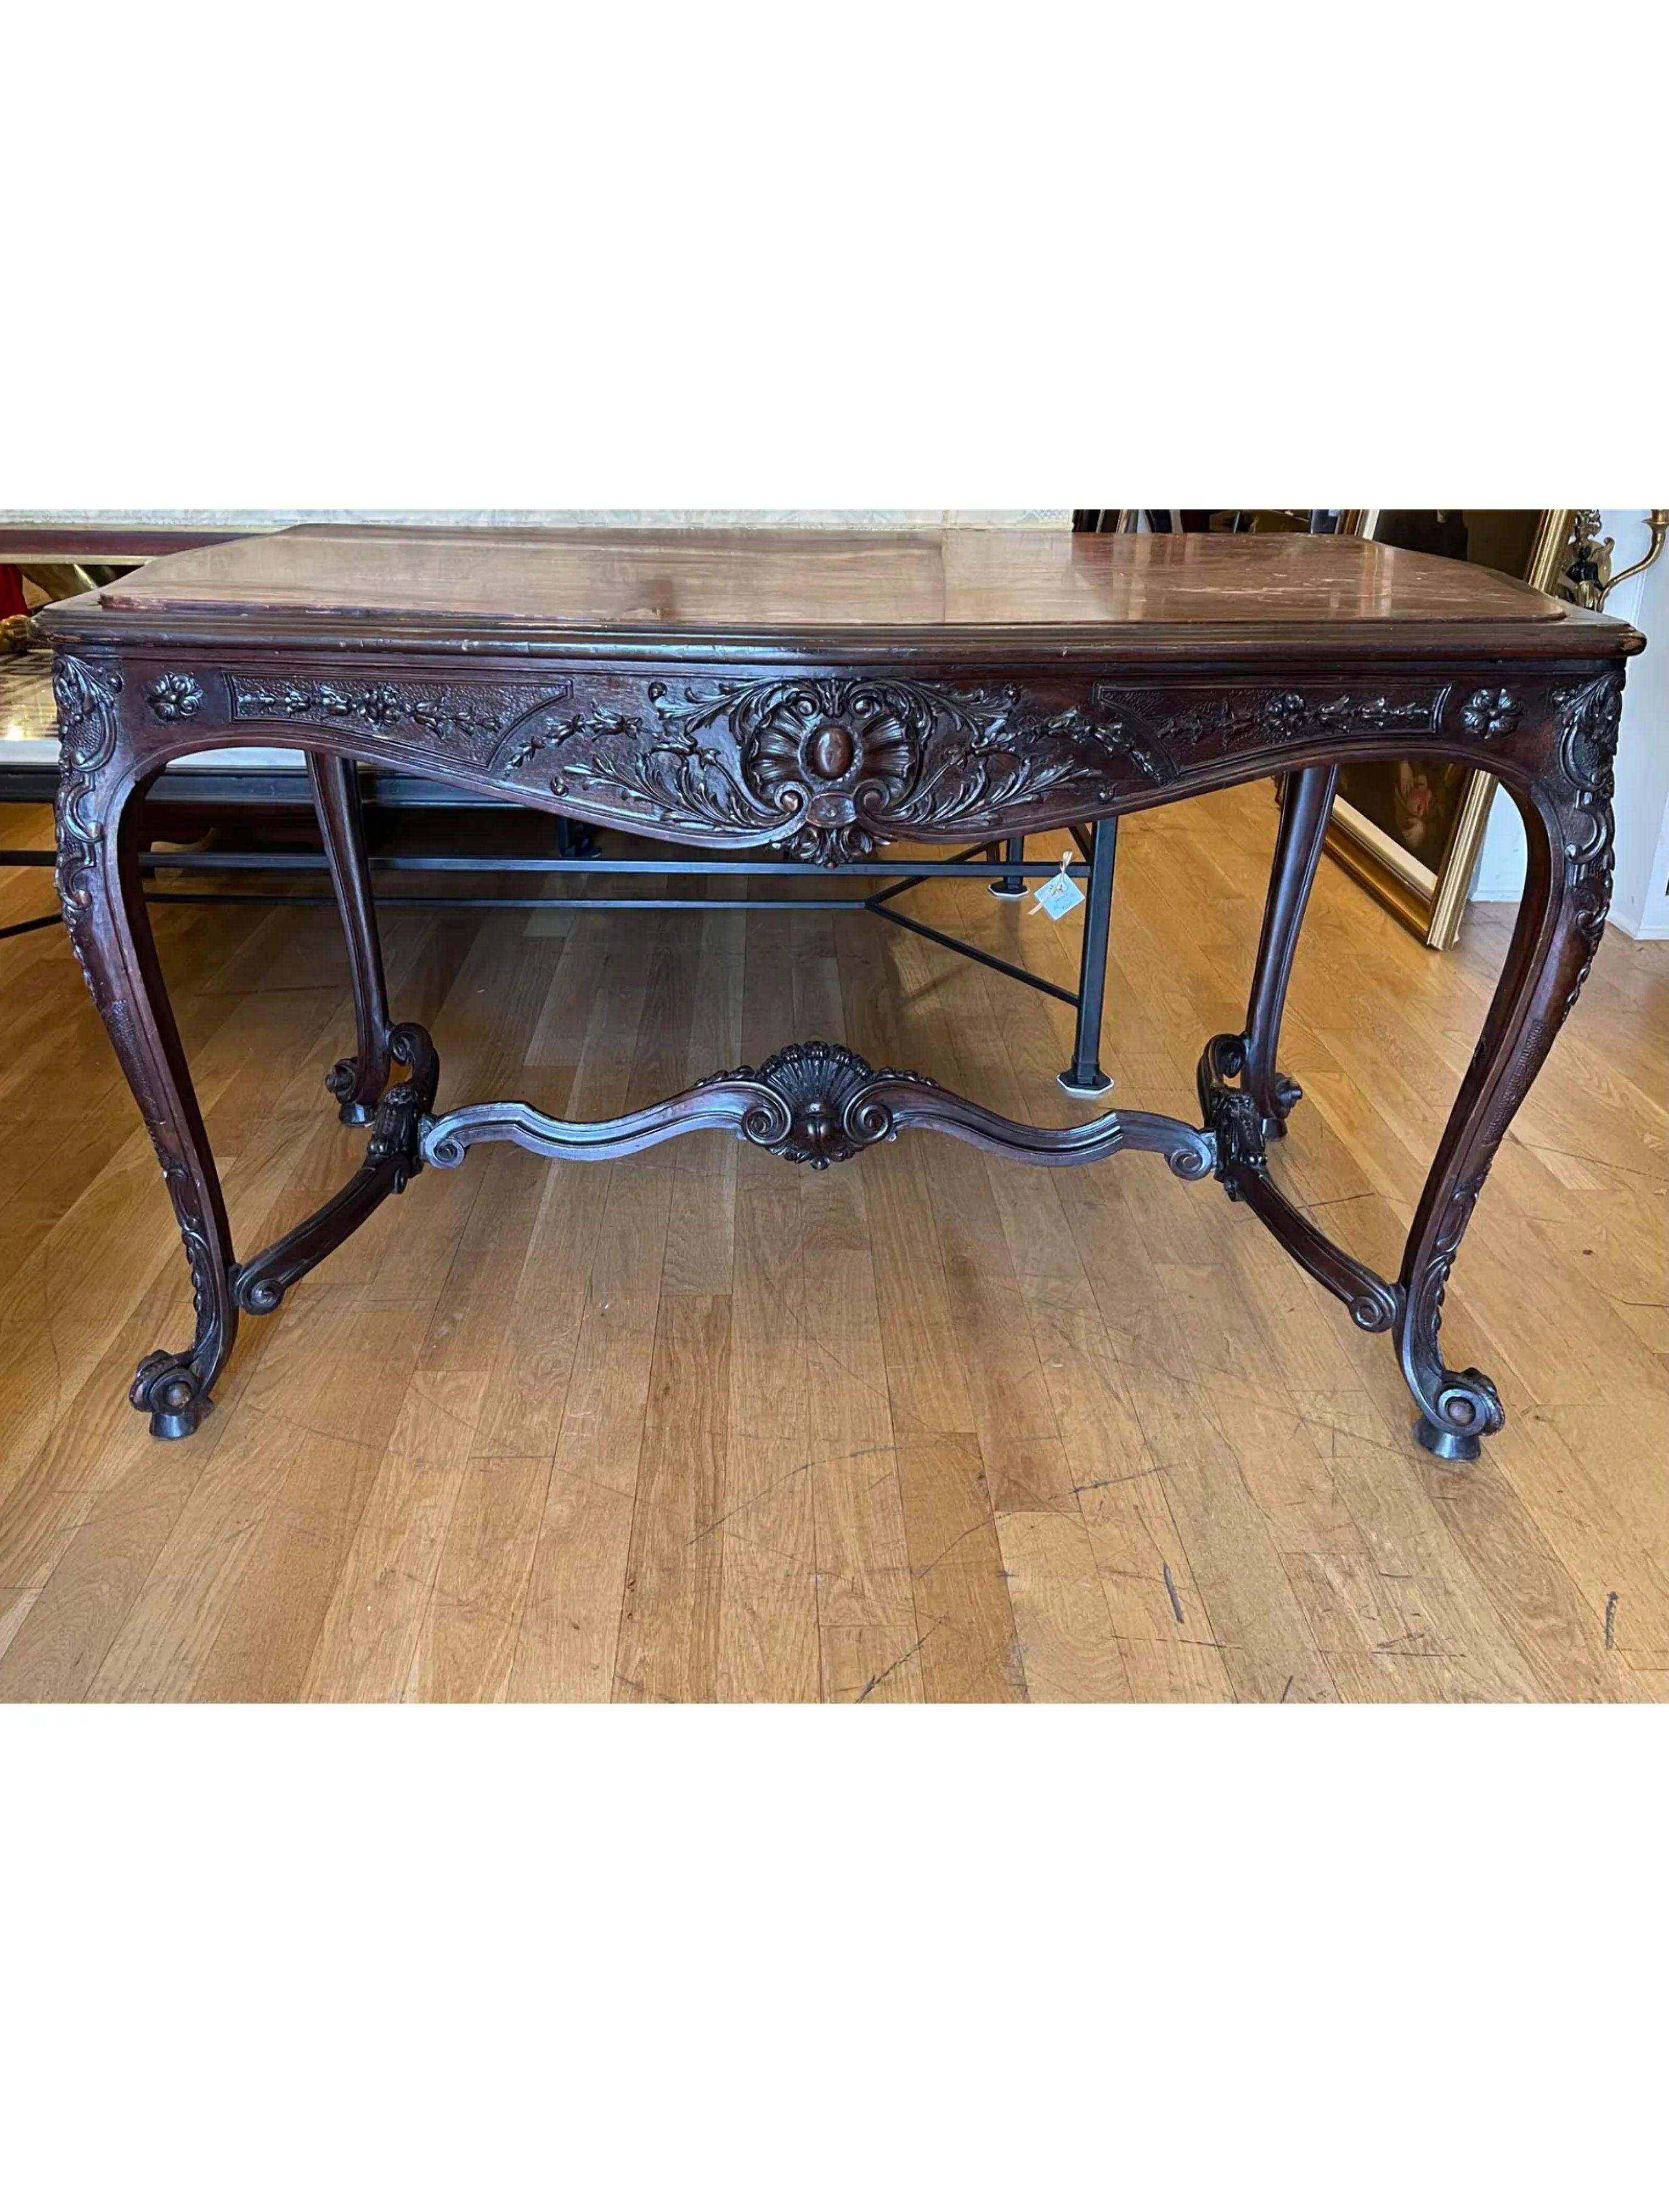 Antique French Provincial Marble Top Center Table, Early 19th Century For Sale 1